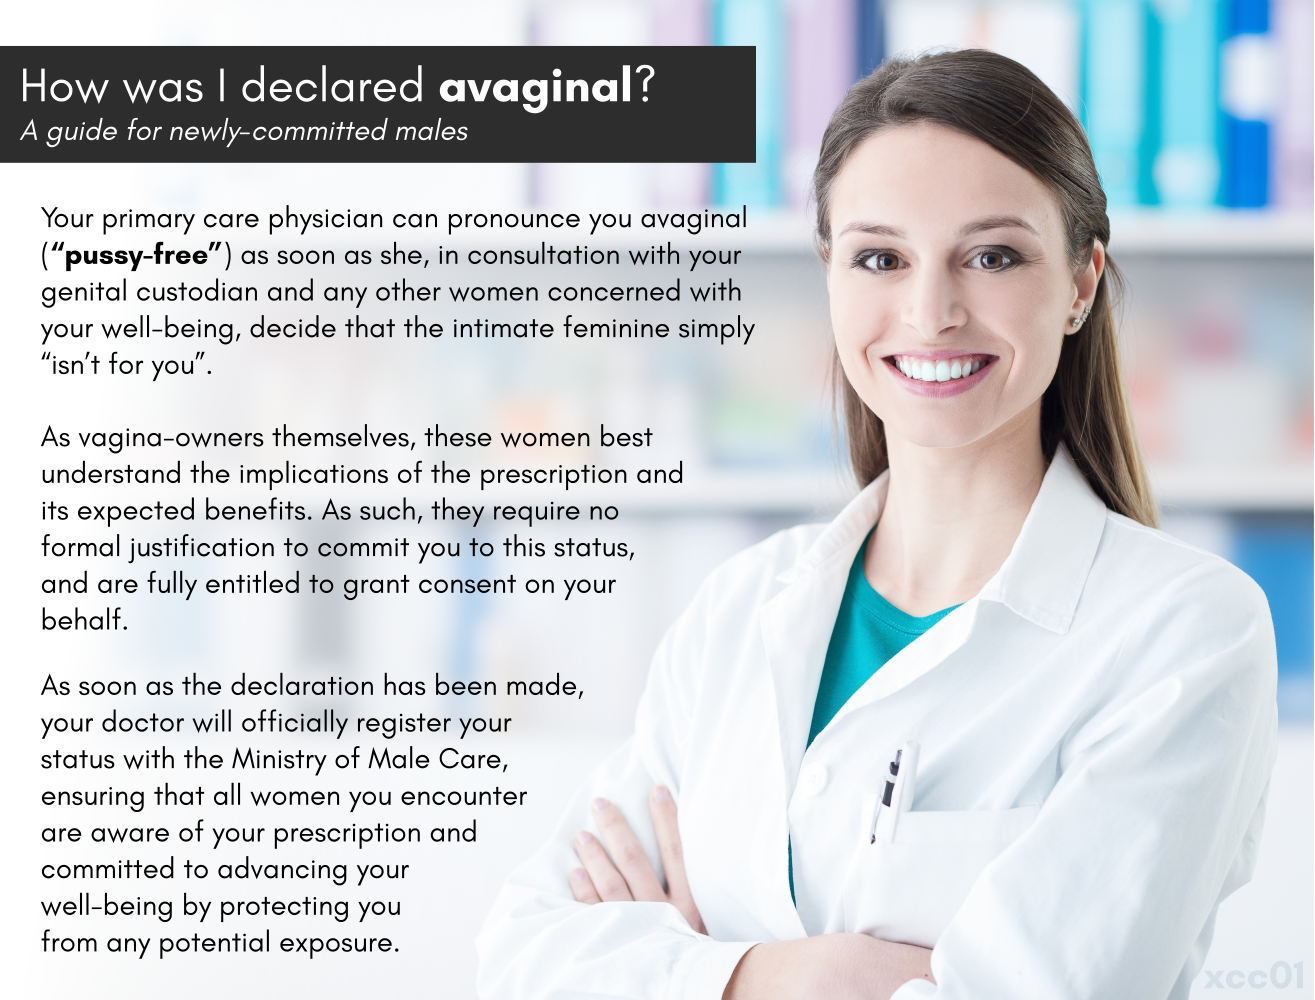 How was I declared avaginal? A guide for newly-committed males. Your primary care physician can pronounce you avaginal (“pussy-free”) as soon as she, in consultation with your genital custodian and any other women concerned with your well-being, decide that the intimate feminine simply “isn’t for you”. As vagina-owners themselves, these women best understand the implications of the prescription and its expected benefits. As such, they require no formal justification to commit you to this status, and are fully entitled to grant consent on your behalf. As soon as the declaration has been made, your doctor will officially register your status with the Ministry of Male Care, ensuring that all women you encounter are aware of your prescription and committed to advancing your well-being by protecting you from any potential exposure.
